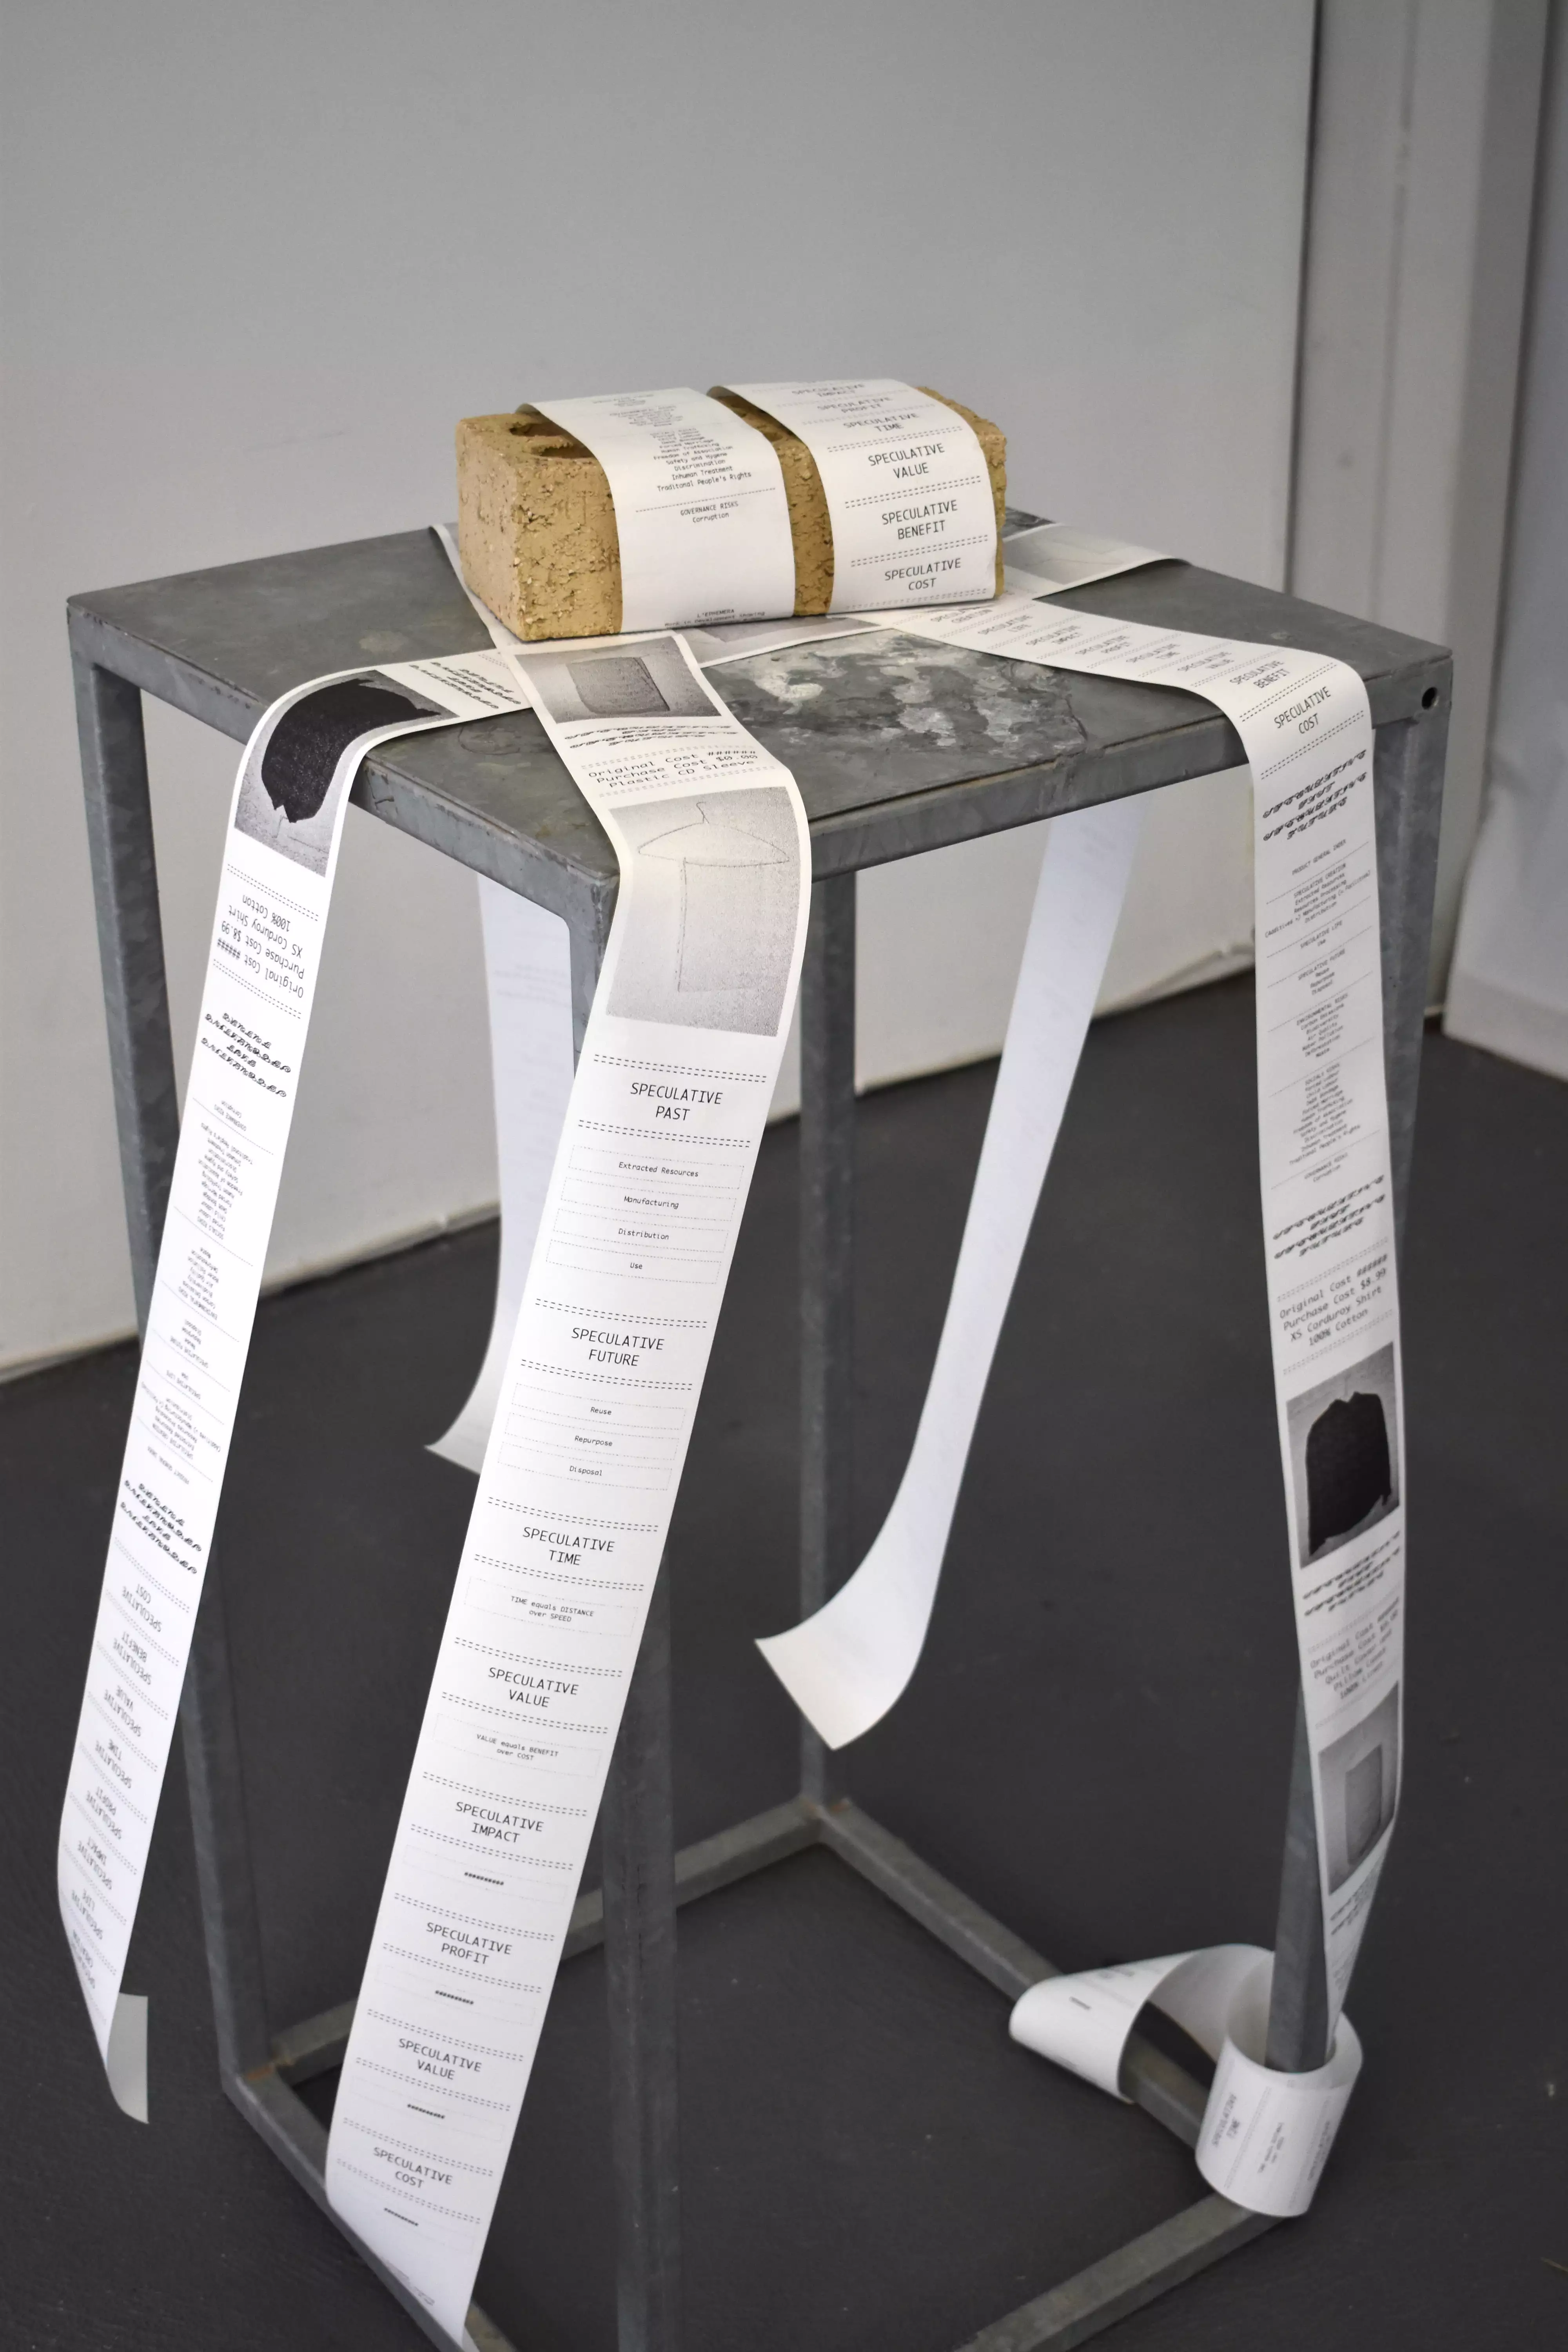 Long receipts containing research are weighed down by a brick on top of a grey metal plinth.